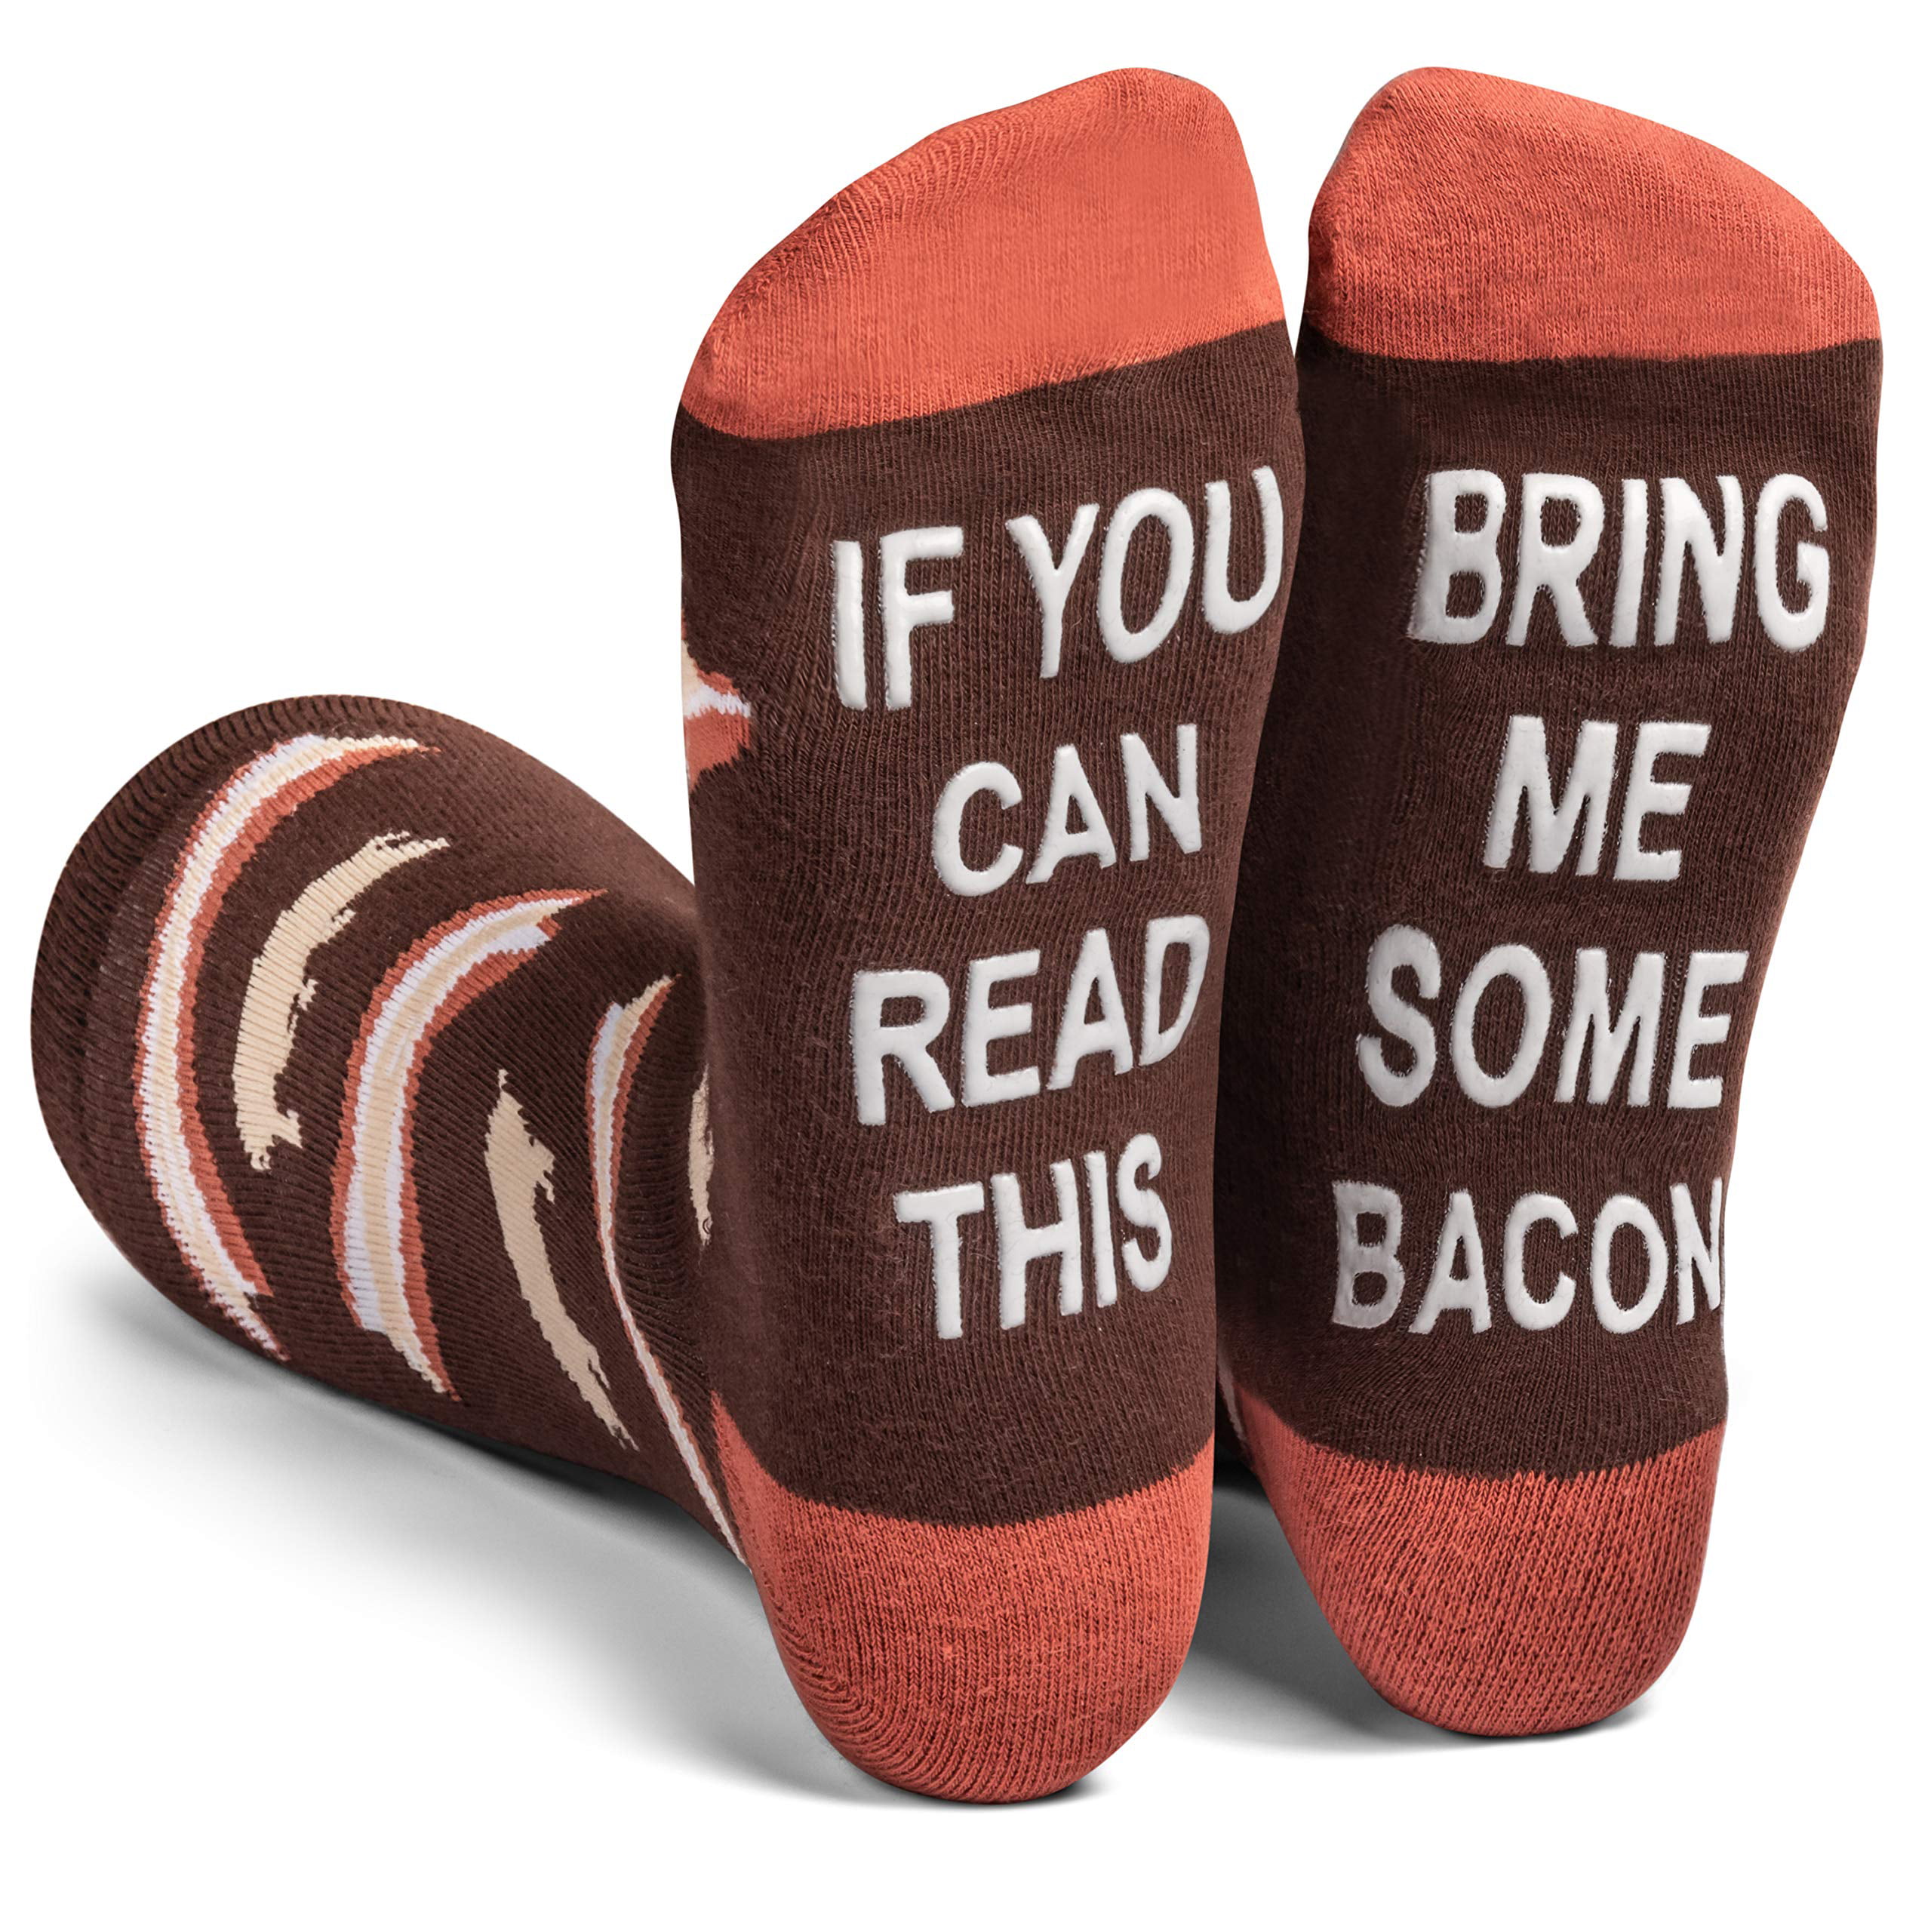 If You Can Read This Bring Me Cheetos Socks Novelty Funky Crew Socks Men Women Christmas Gifts Cotton Slipper Socks 